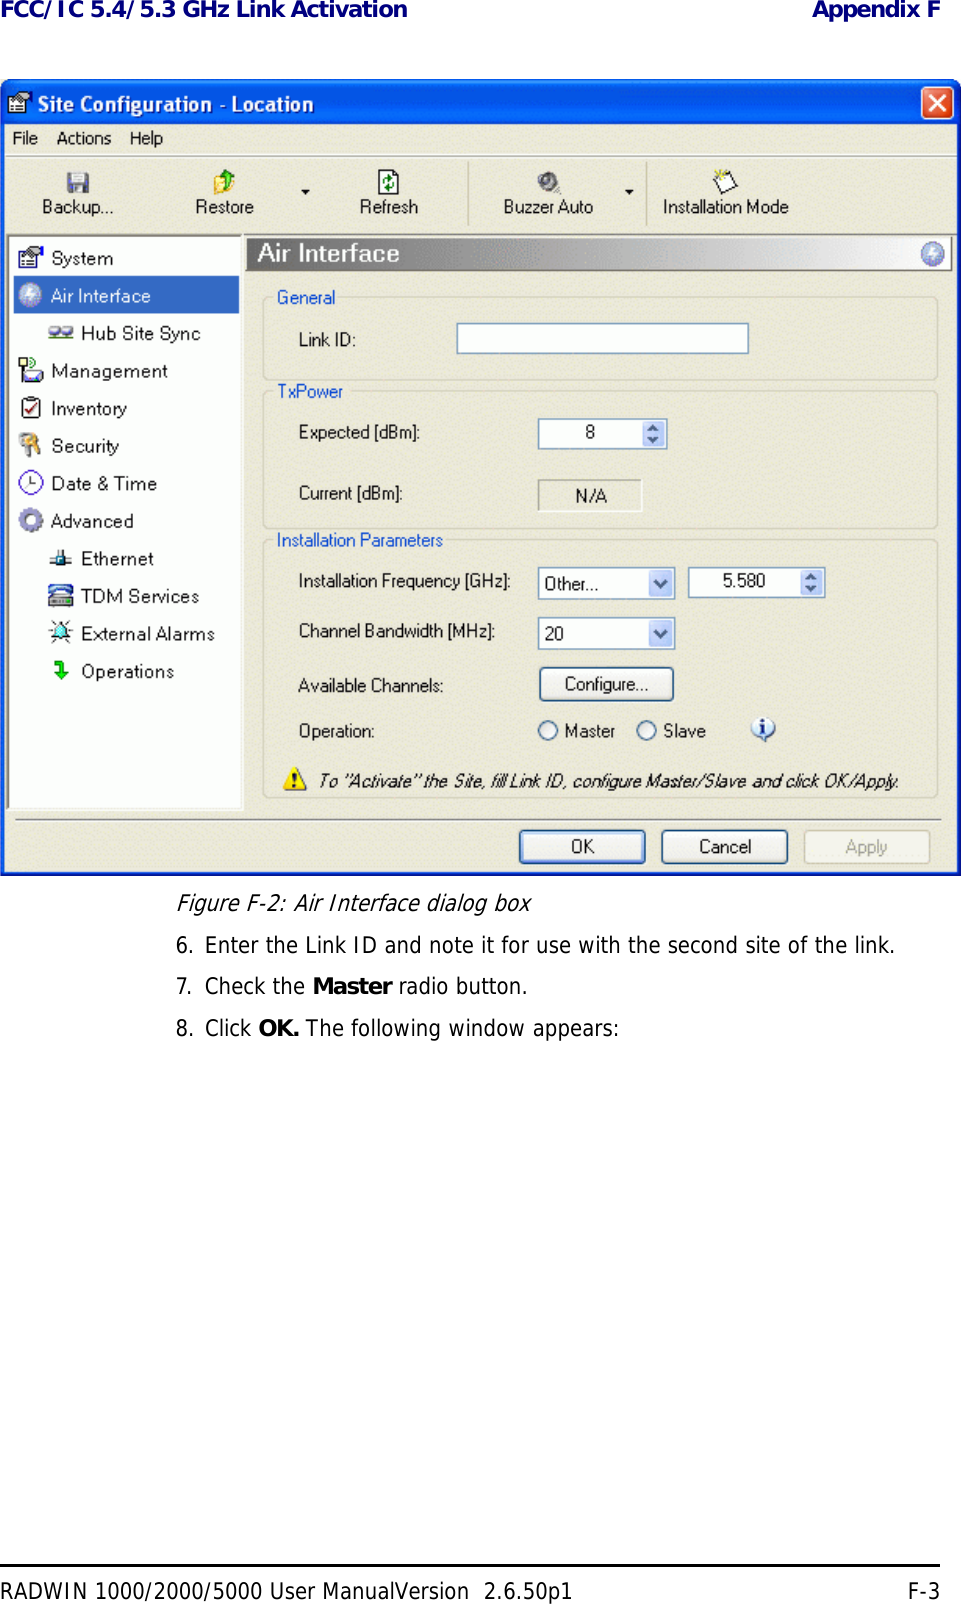 FCC/IC 5.4/5.3 GHz Link Activation Appendix FRADWIN 1000/2000/5000 User ManualVersion  2.6.50p1 F-3Figure F-2: Air Interface dialog box6. Enter the Link ID and note it for use with the second site of the link.7. Check the Master radio button.8. Click OK. The following window appears: